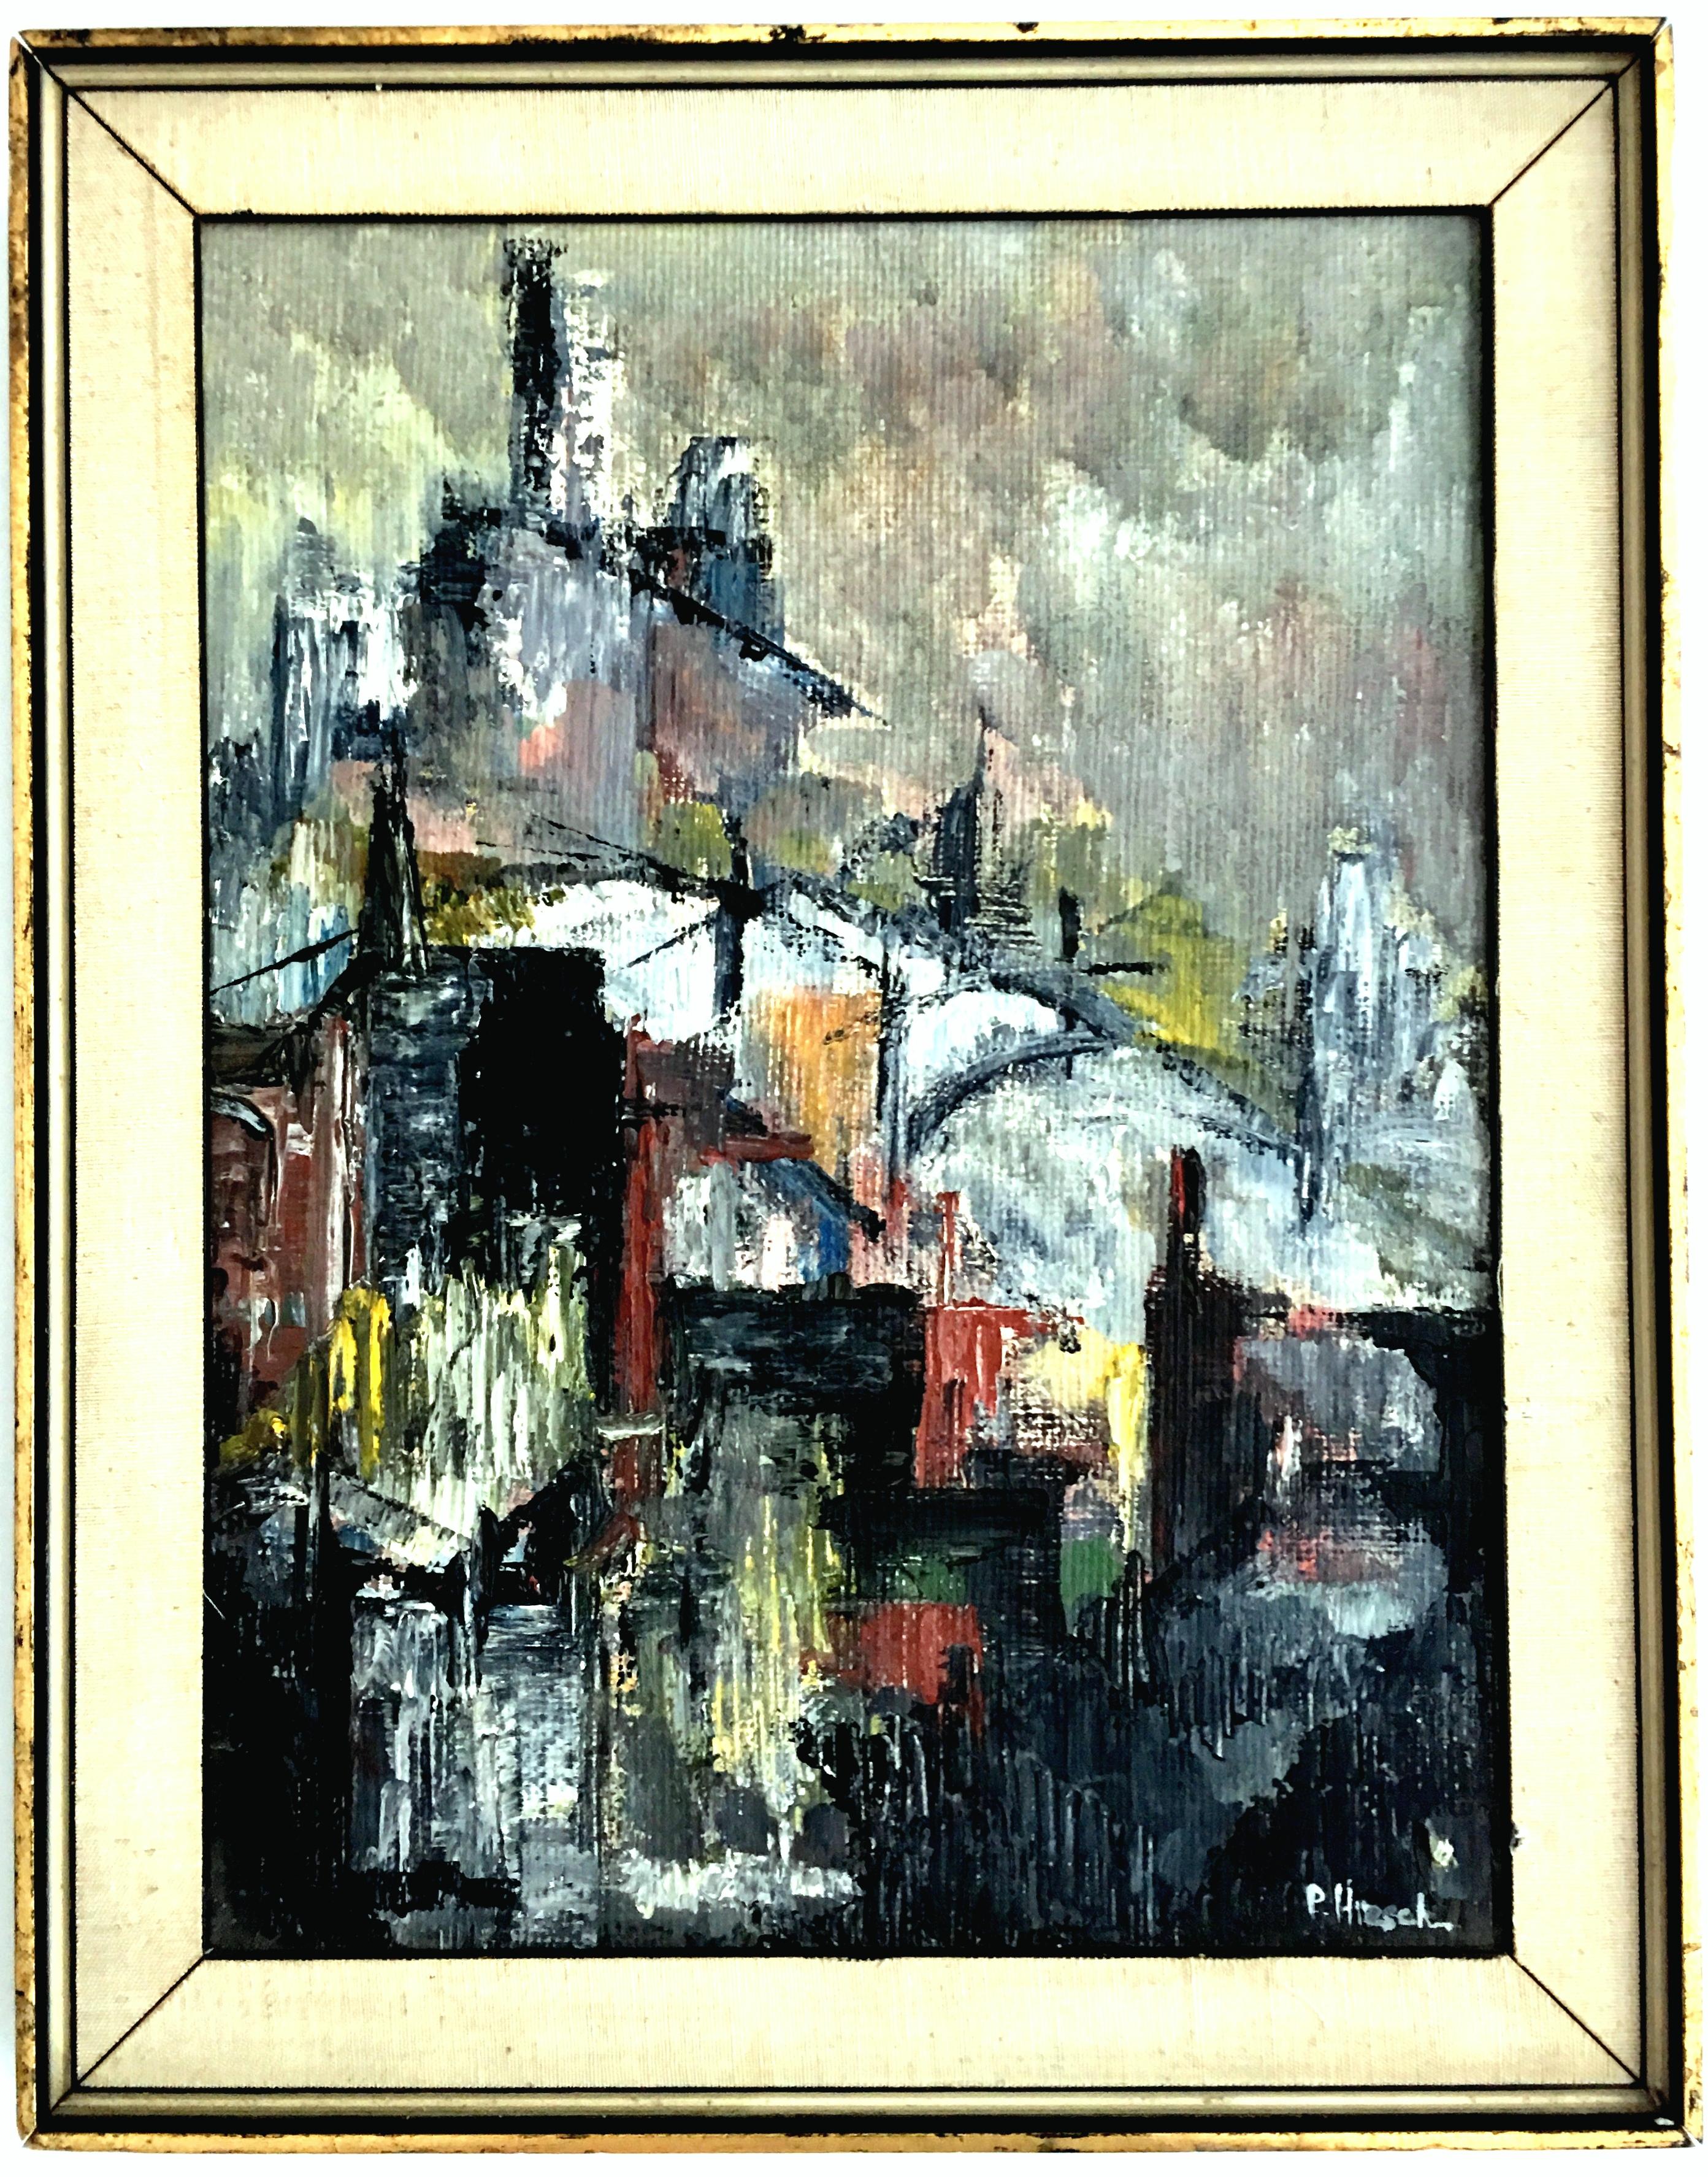 Mid-Century Modern original oil on cardboard abstract cityscape painting by, Peter Hirsch. This rare listed artist original oil painting is executed on cardboard with a burlap backing. Peter Hirsch often used cardboard for his paintings. Frame in a